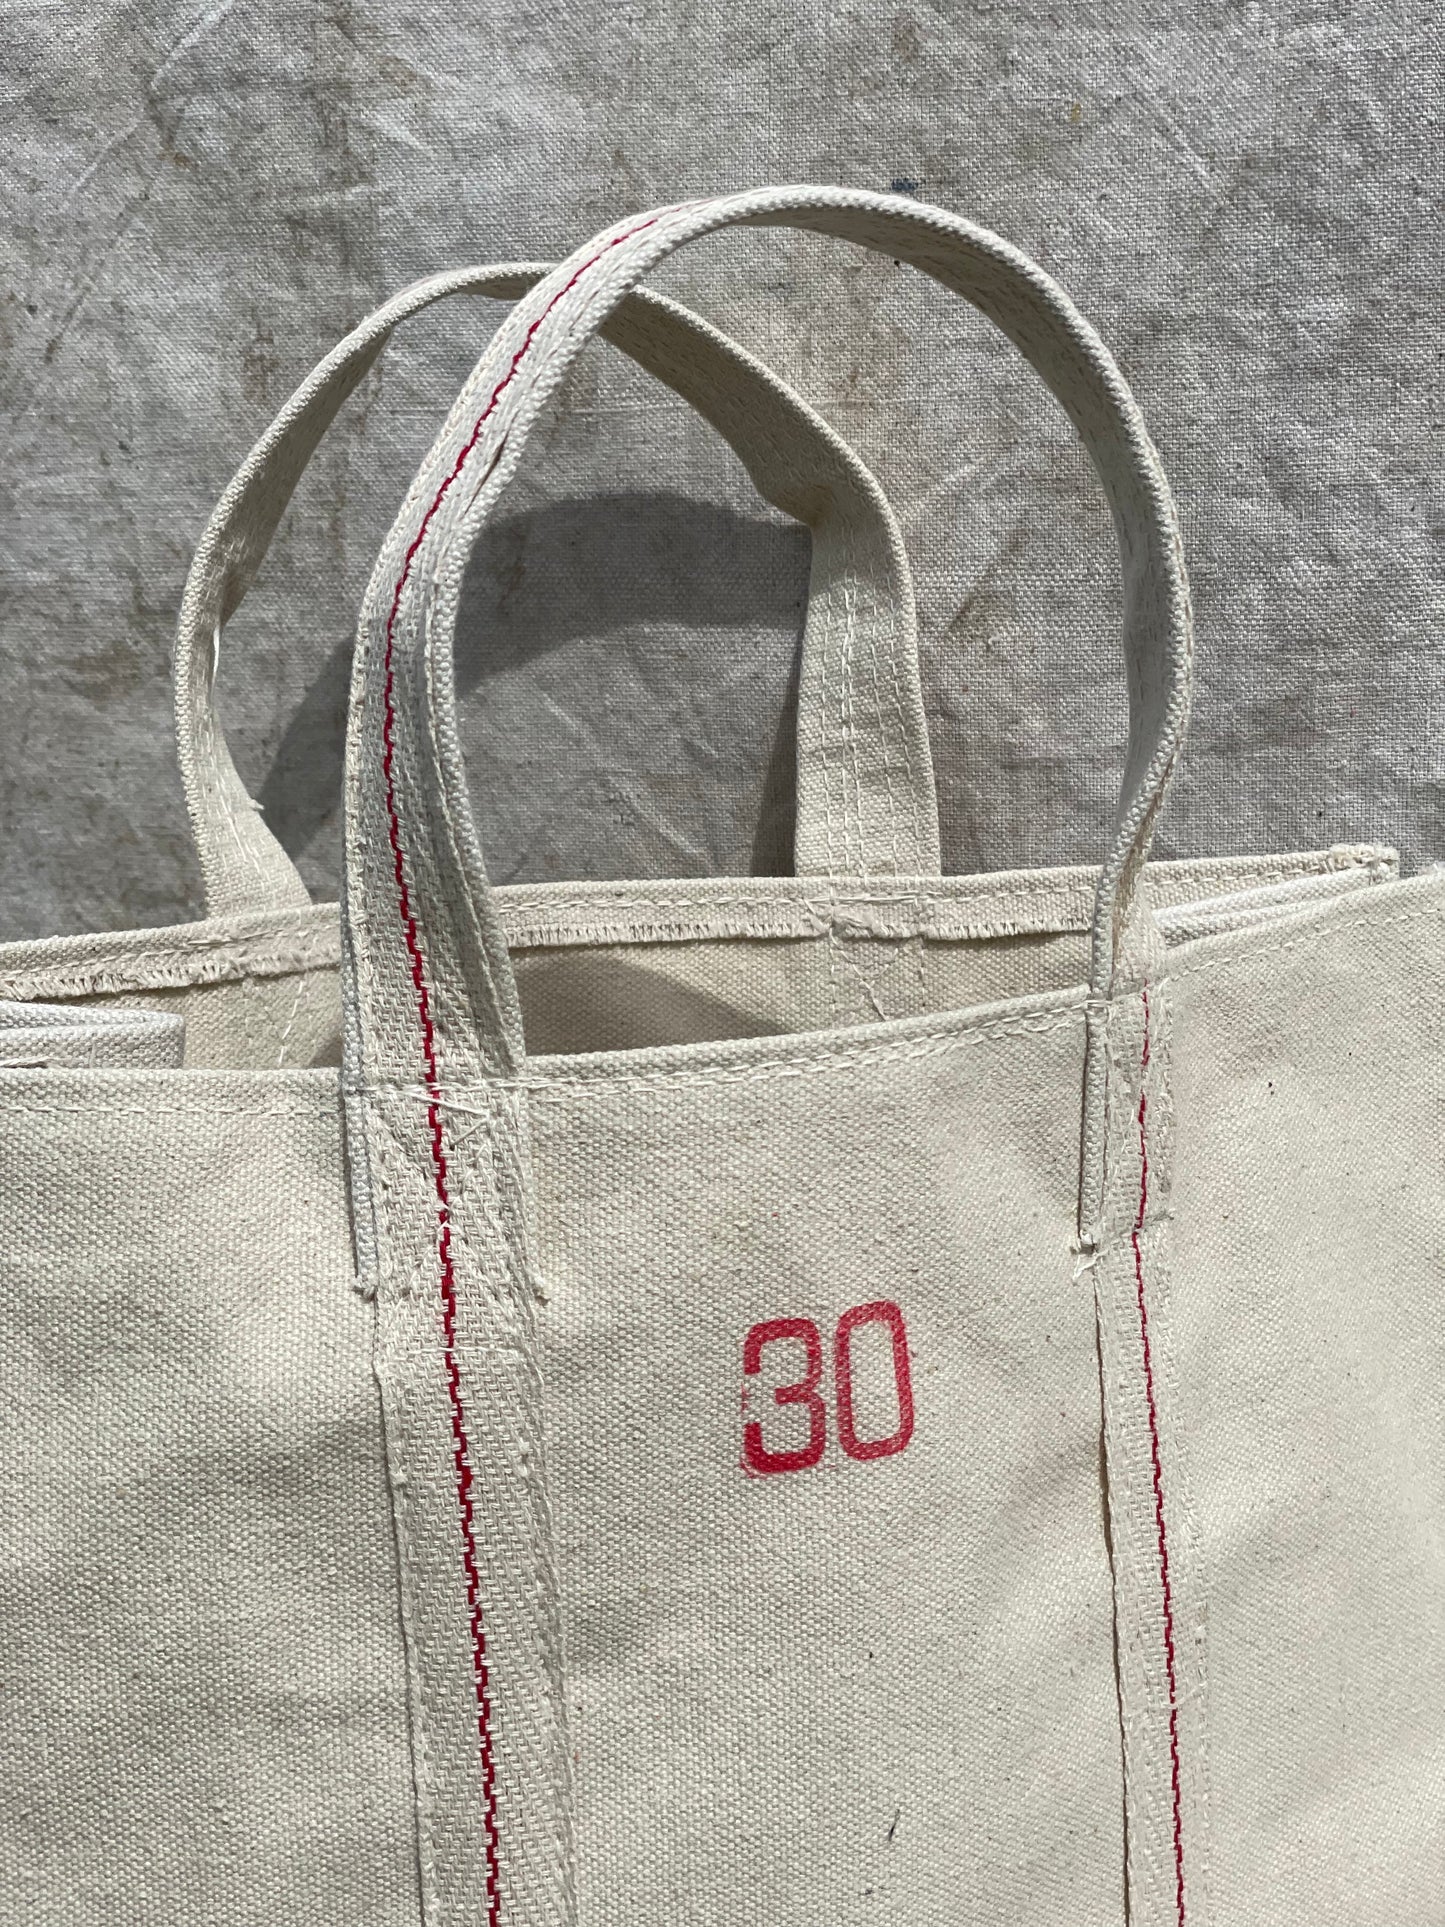 Heavy Duty Natural Canvas Tote Bag Size 30